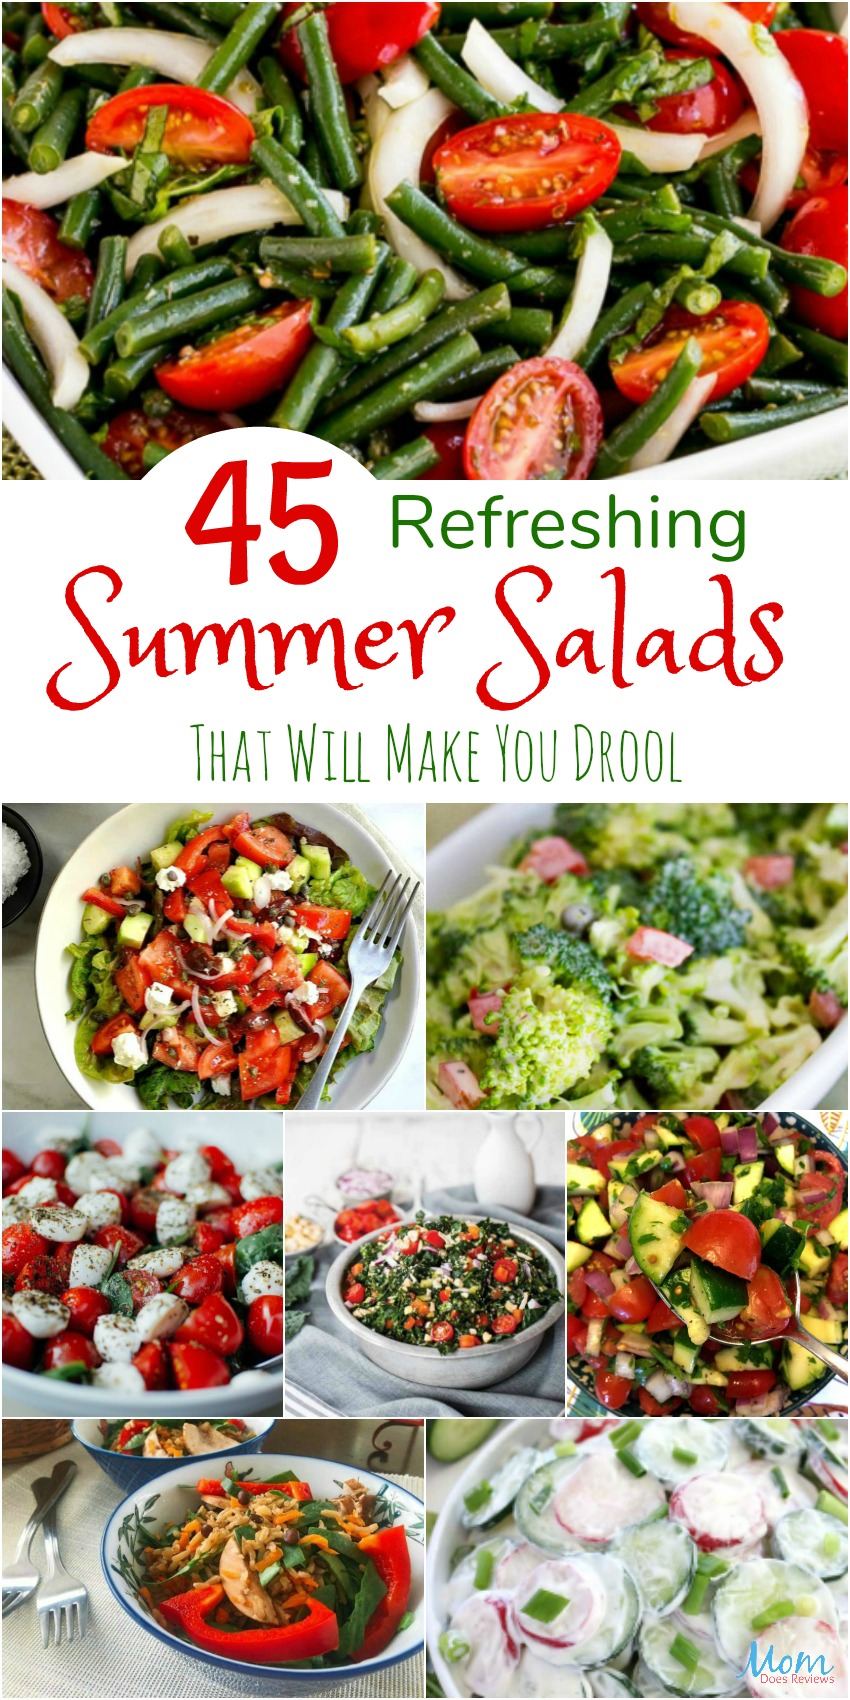 45 Refreshing Summer Salads That Will Make You Drool